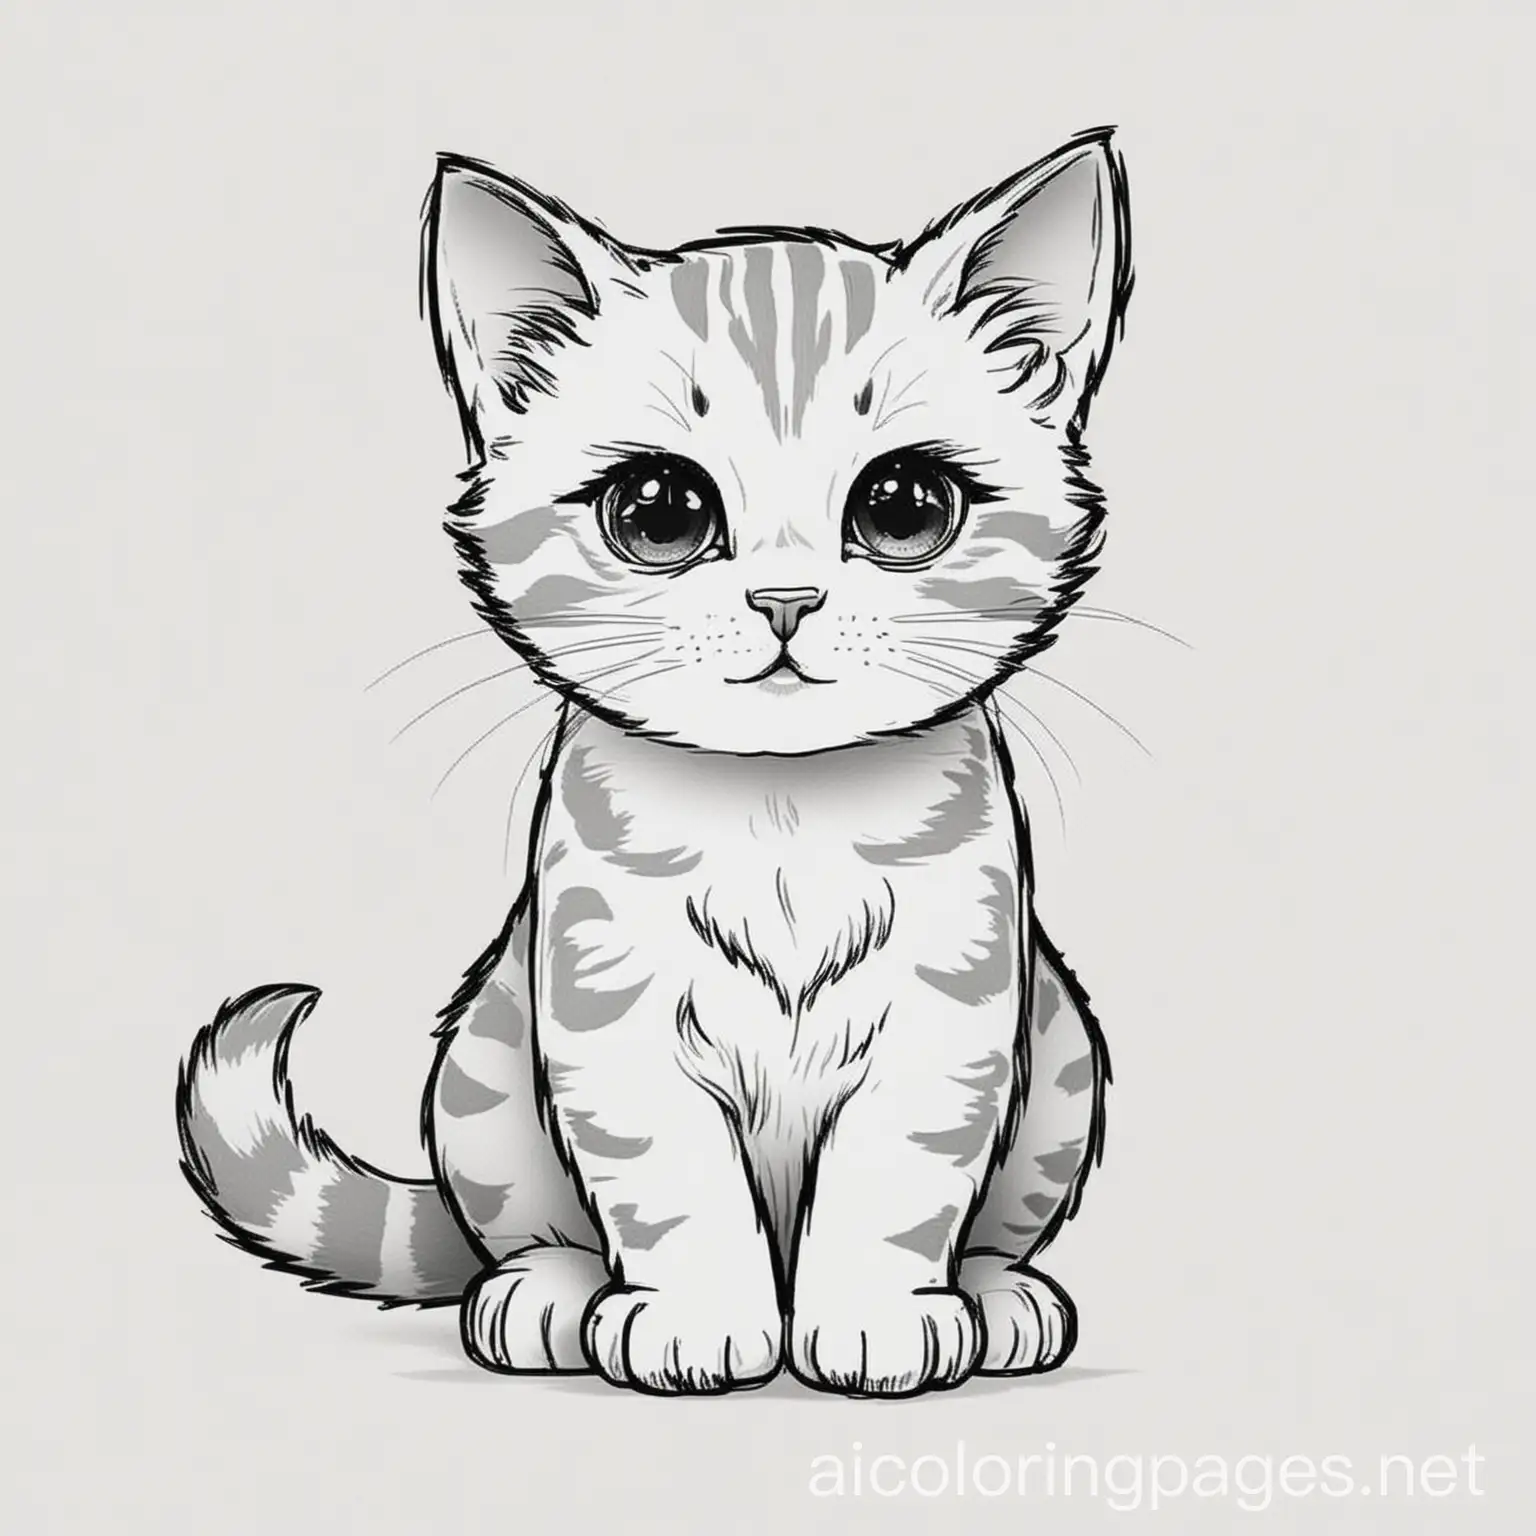 Adorable-Kitten-Coloring-Page-Simple-Black-and-White-Line-Art-for-Kids